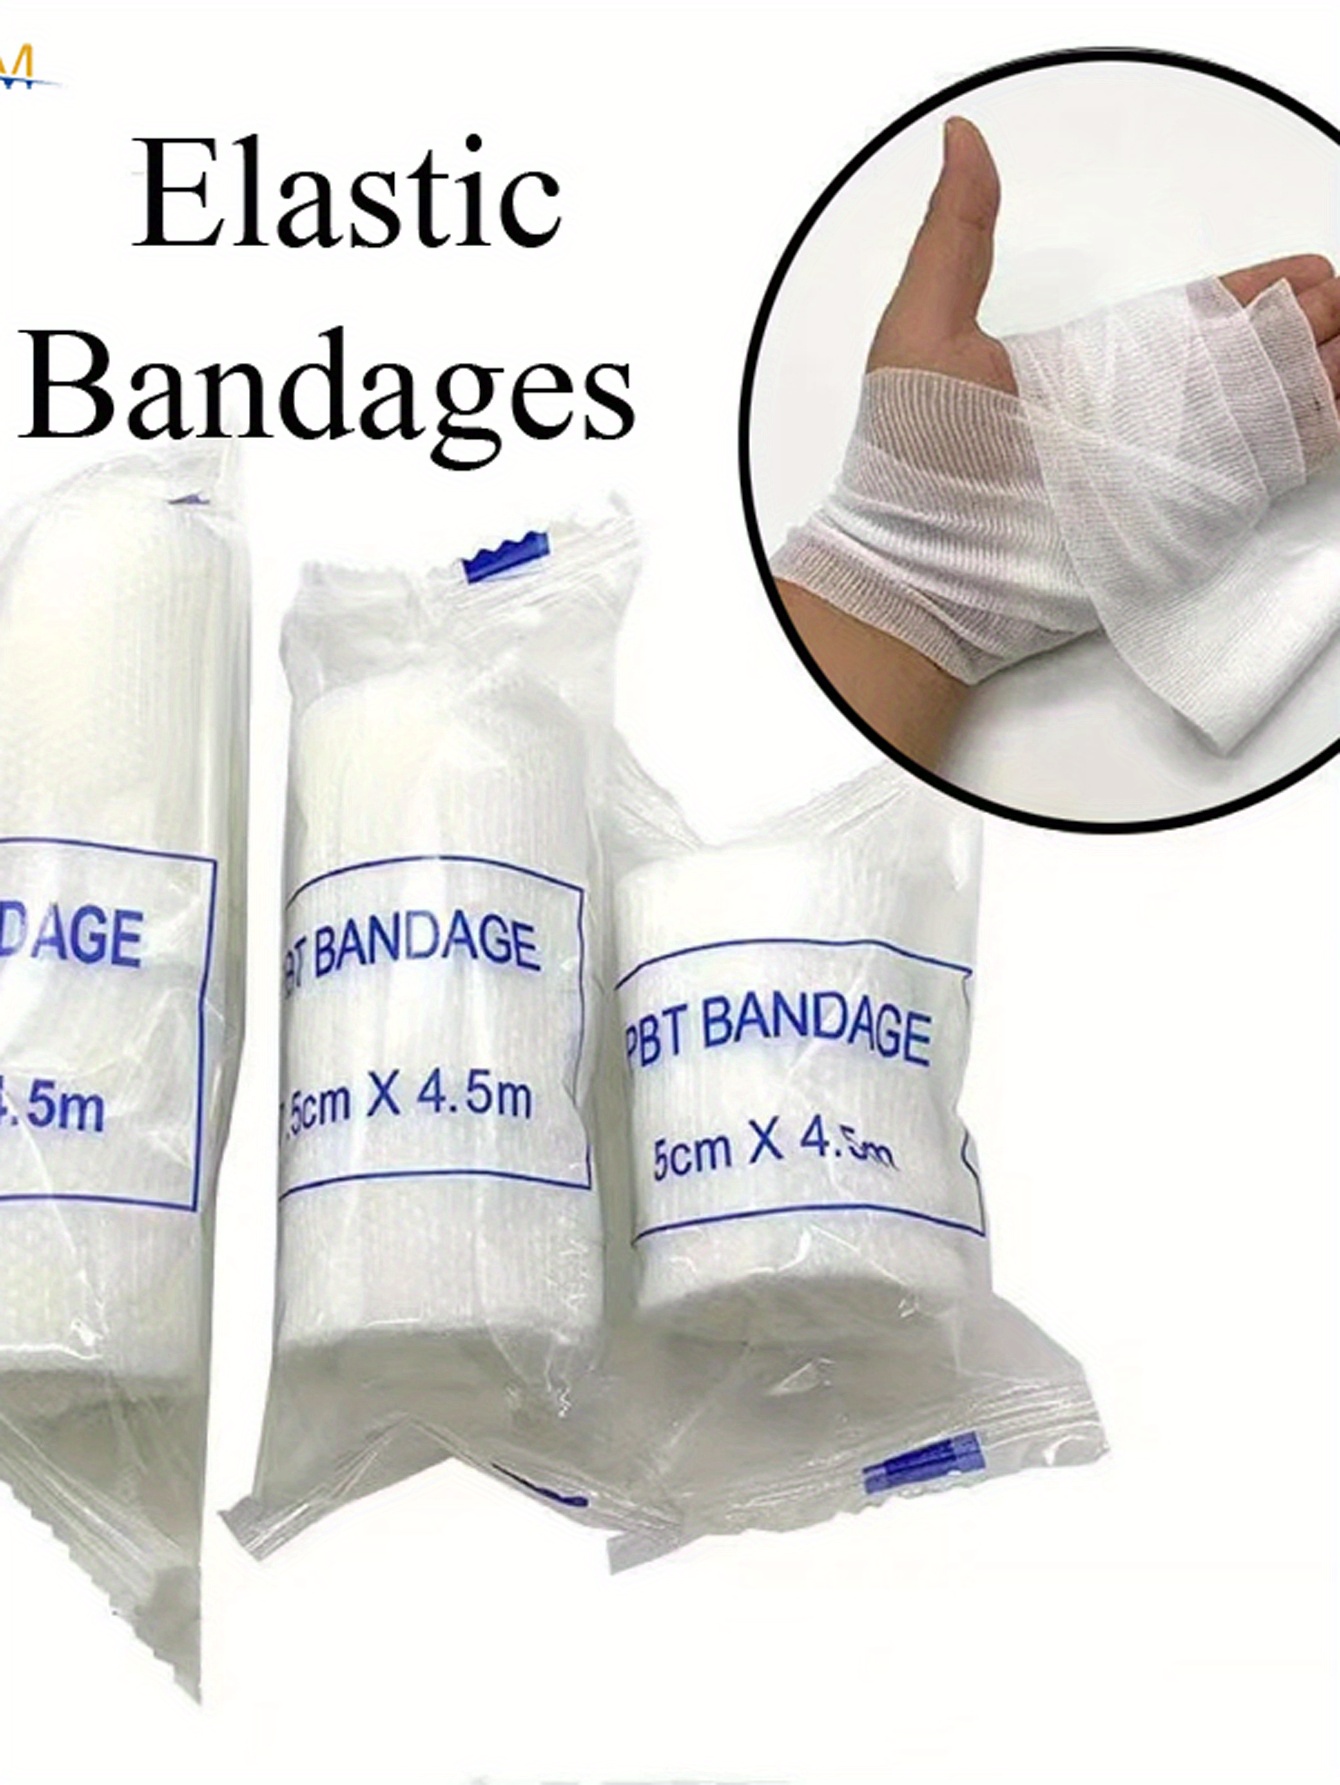 Cotton Gauze Bandage Rolls - Breathable Wound Dressing For First Aid